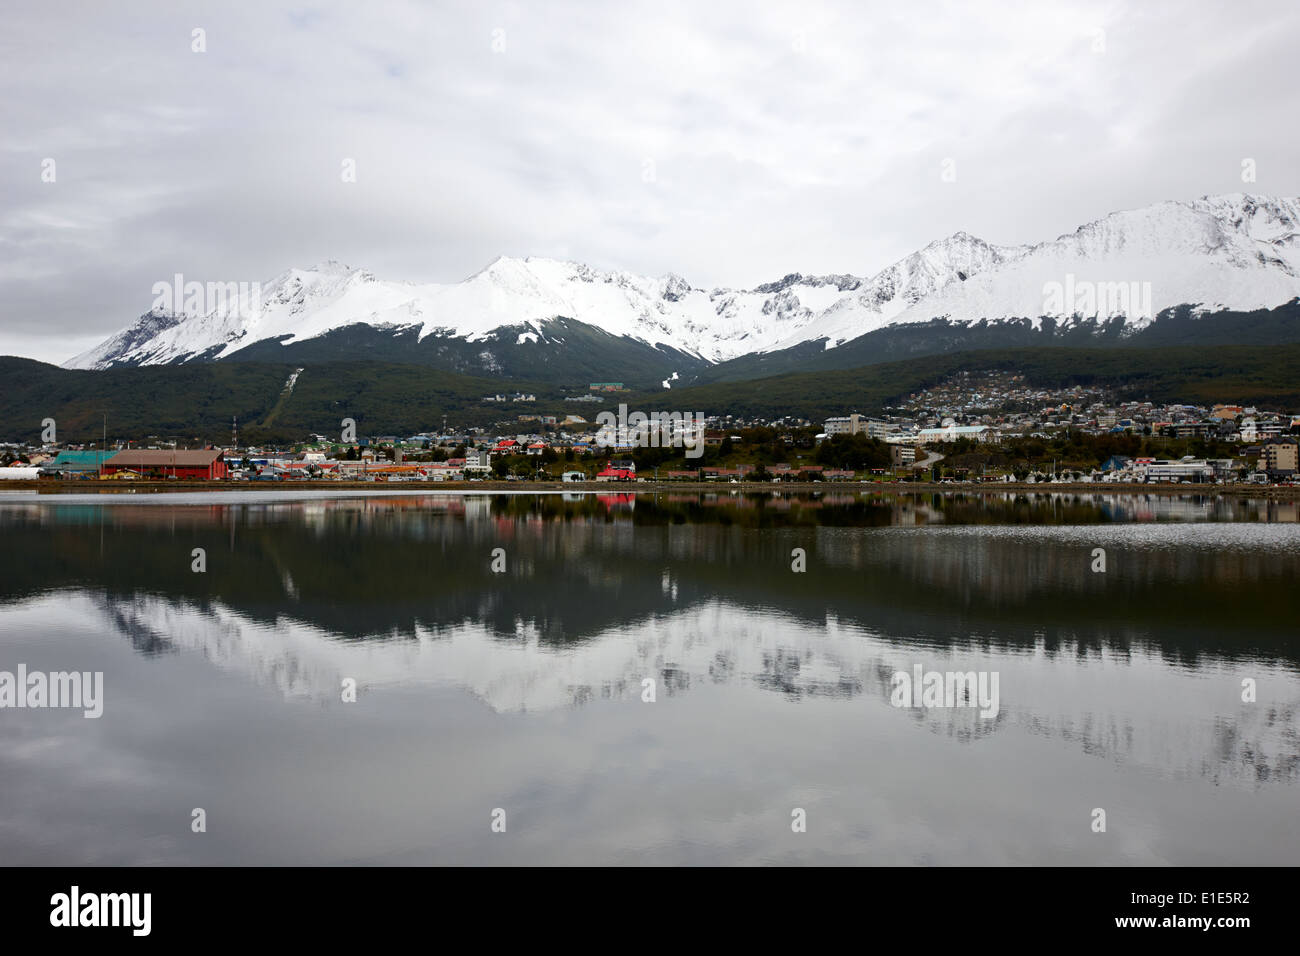 snow covered patagonian mountains from across the bahia encerrada enclosed bay Ushuaia Argentina Stock Photo